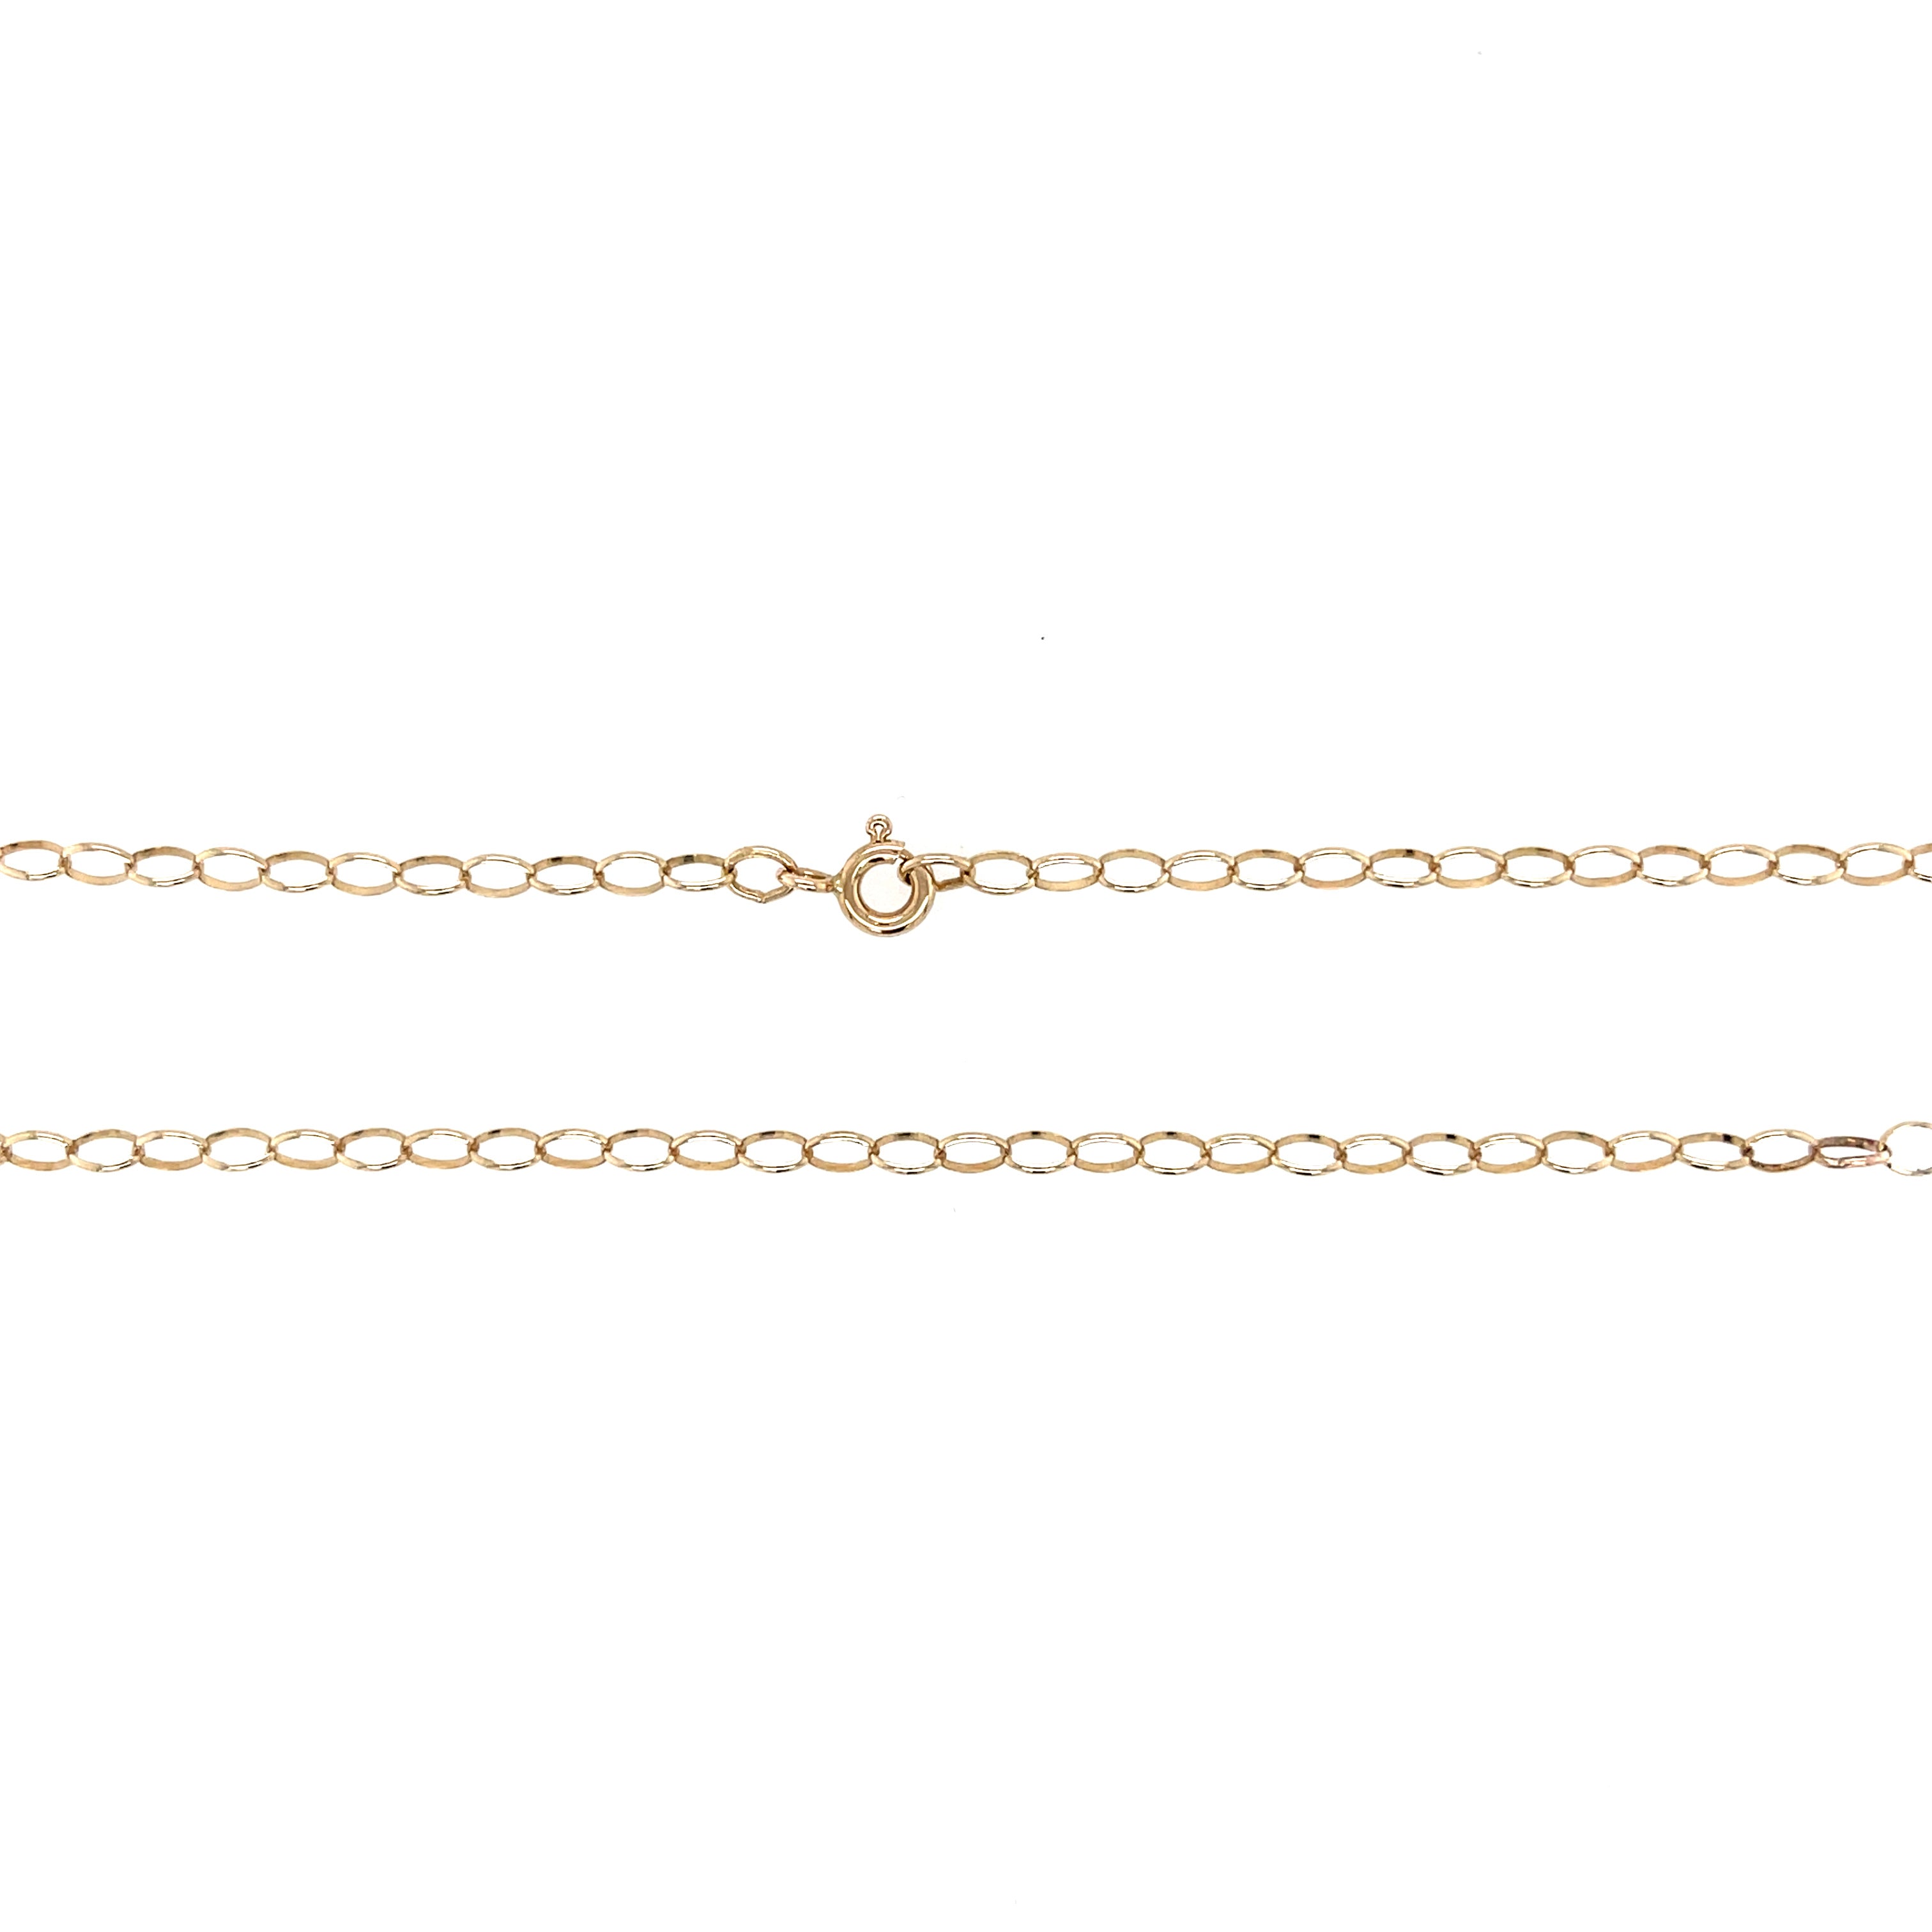 9ct Yellow Gold 18" Oval Belcher Link Chain - 2.20g SOLD